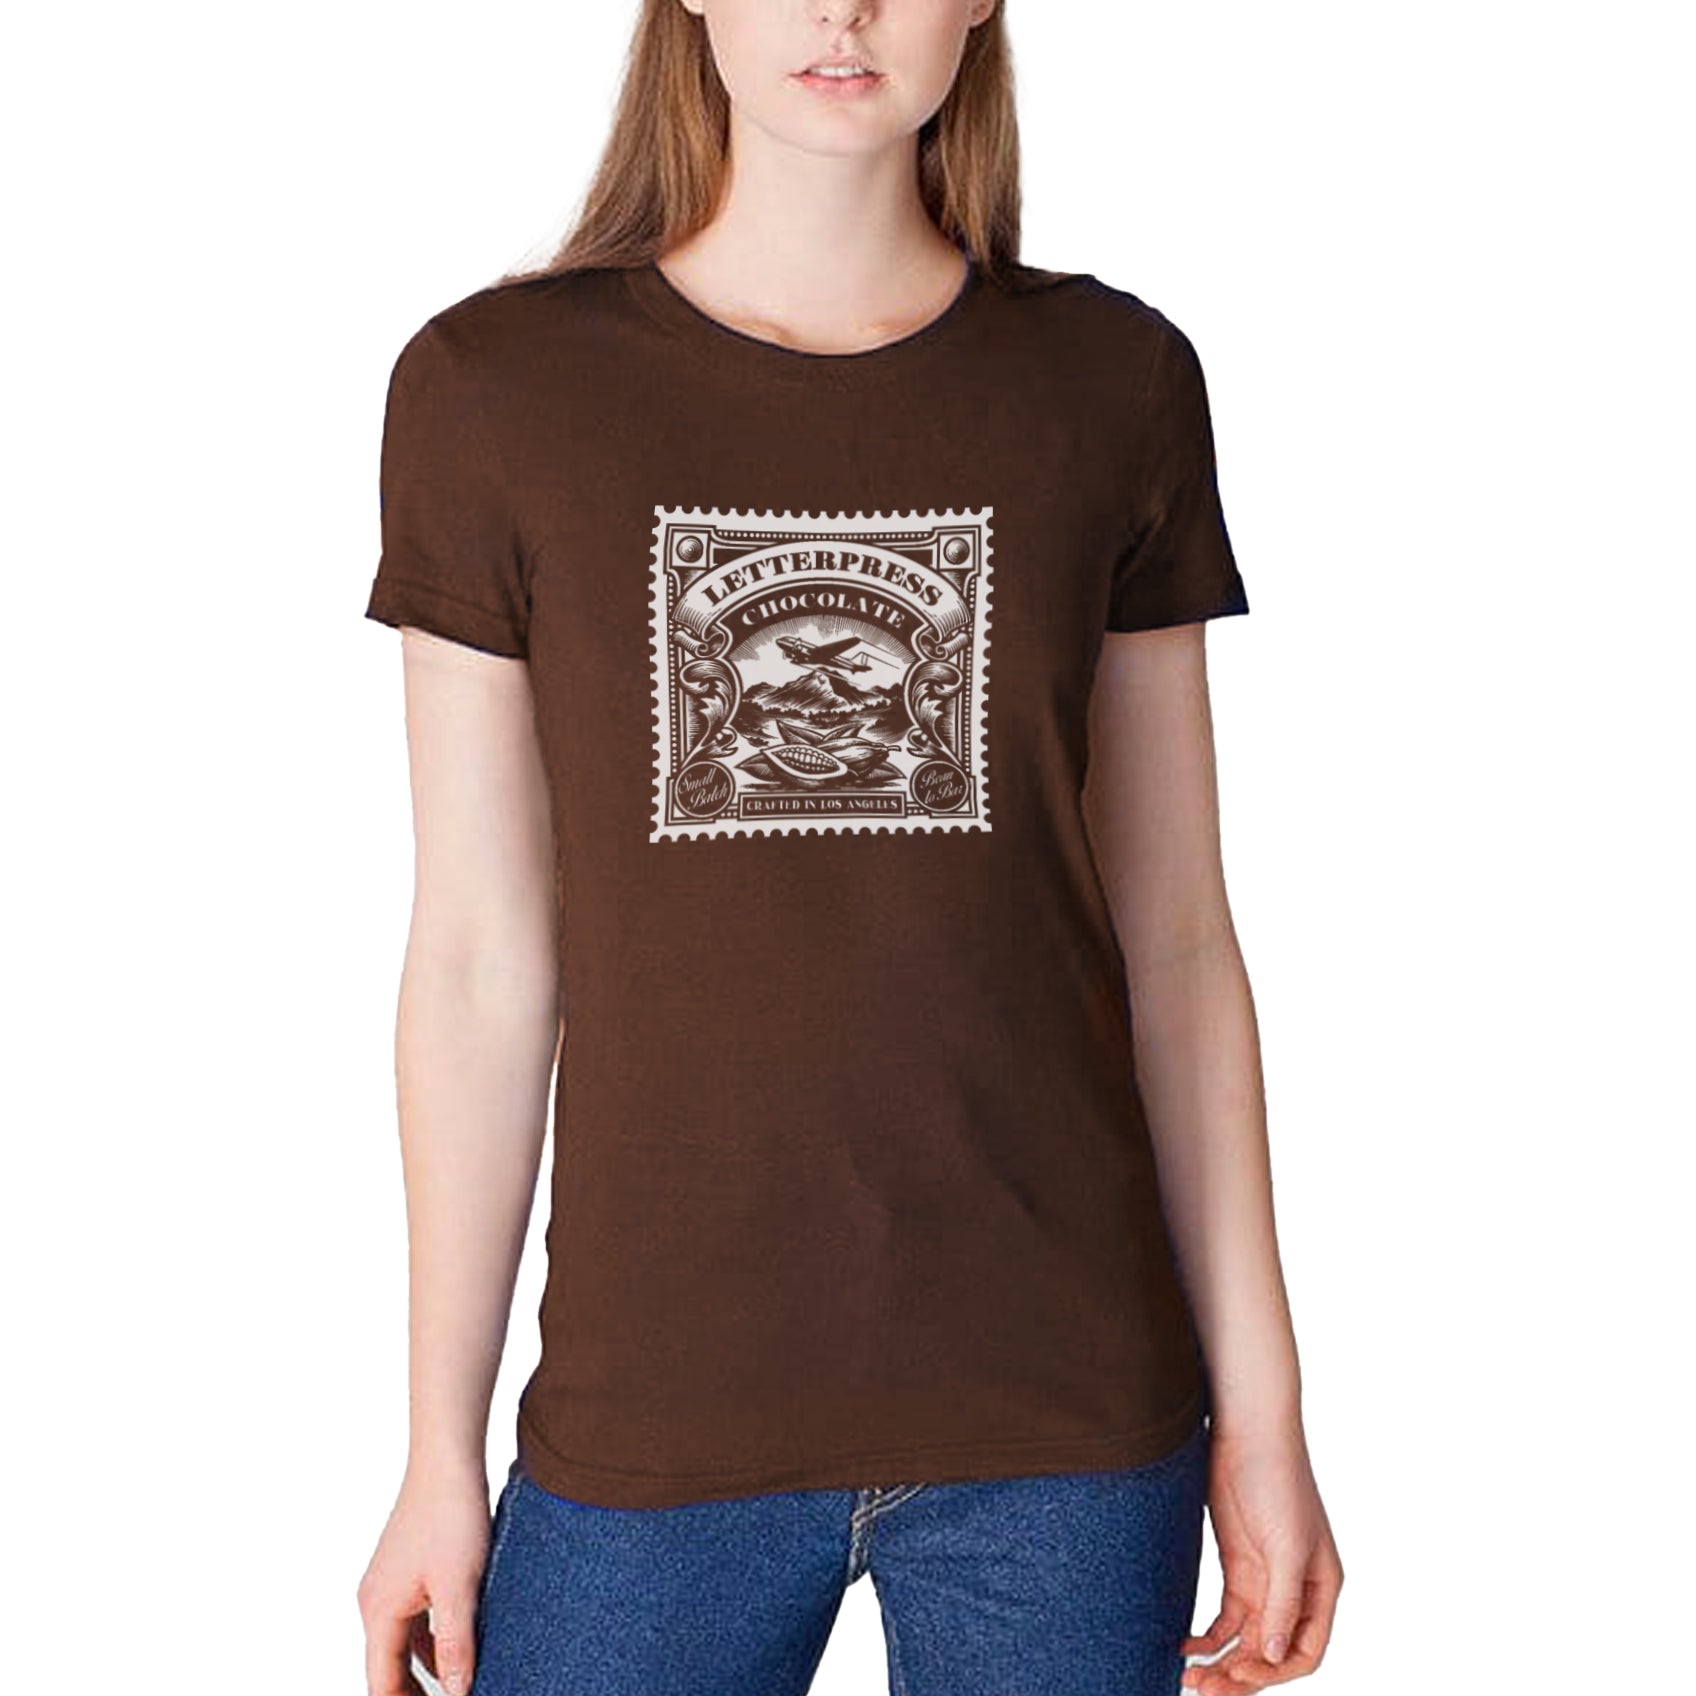 Women's brown - a woman wearing a tshirt with a white letterpress chocolate logo